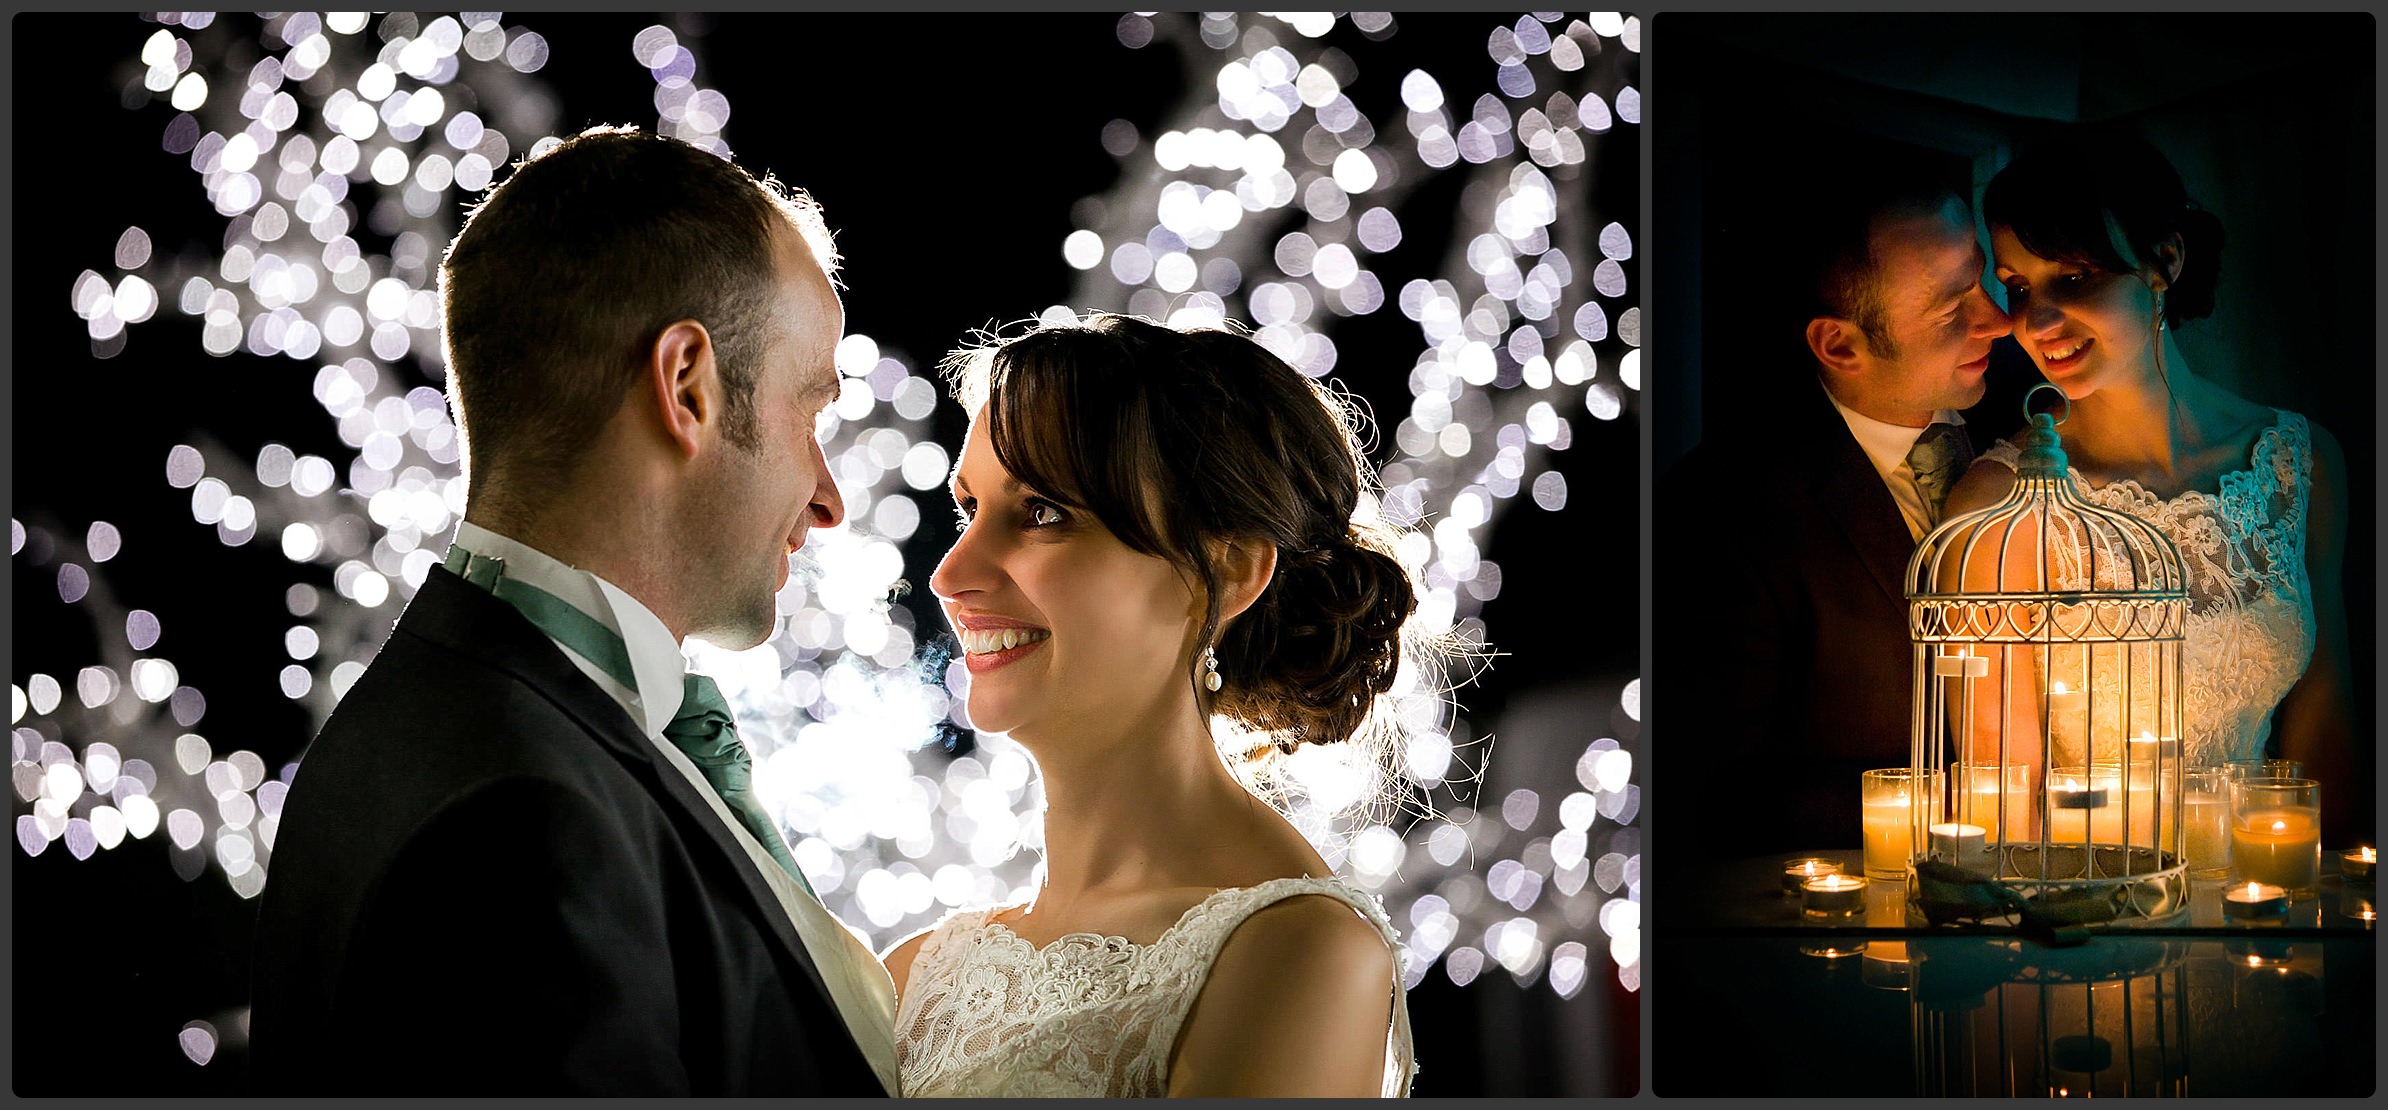 Night time wedding photography at Moxhull Hall Hotel